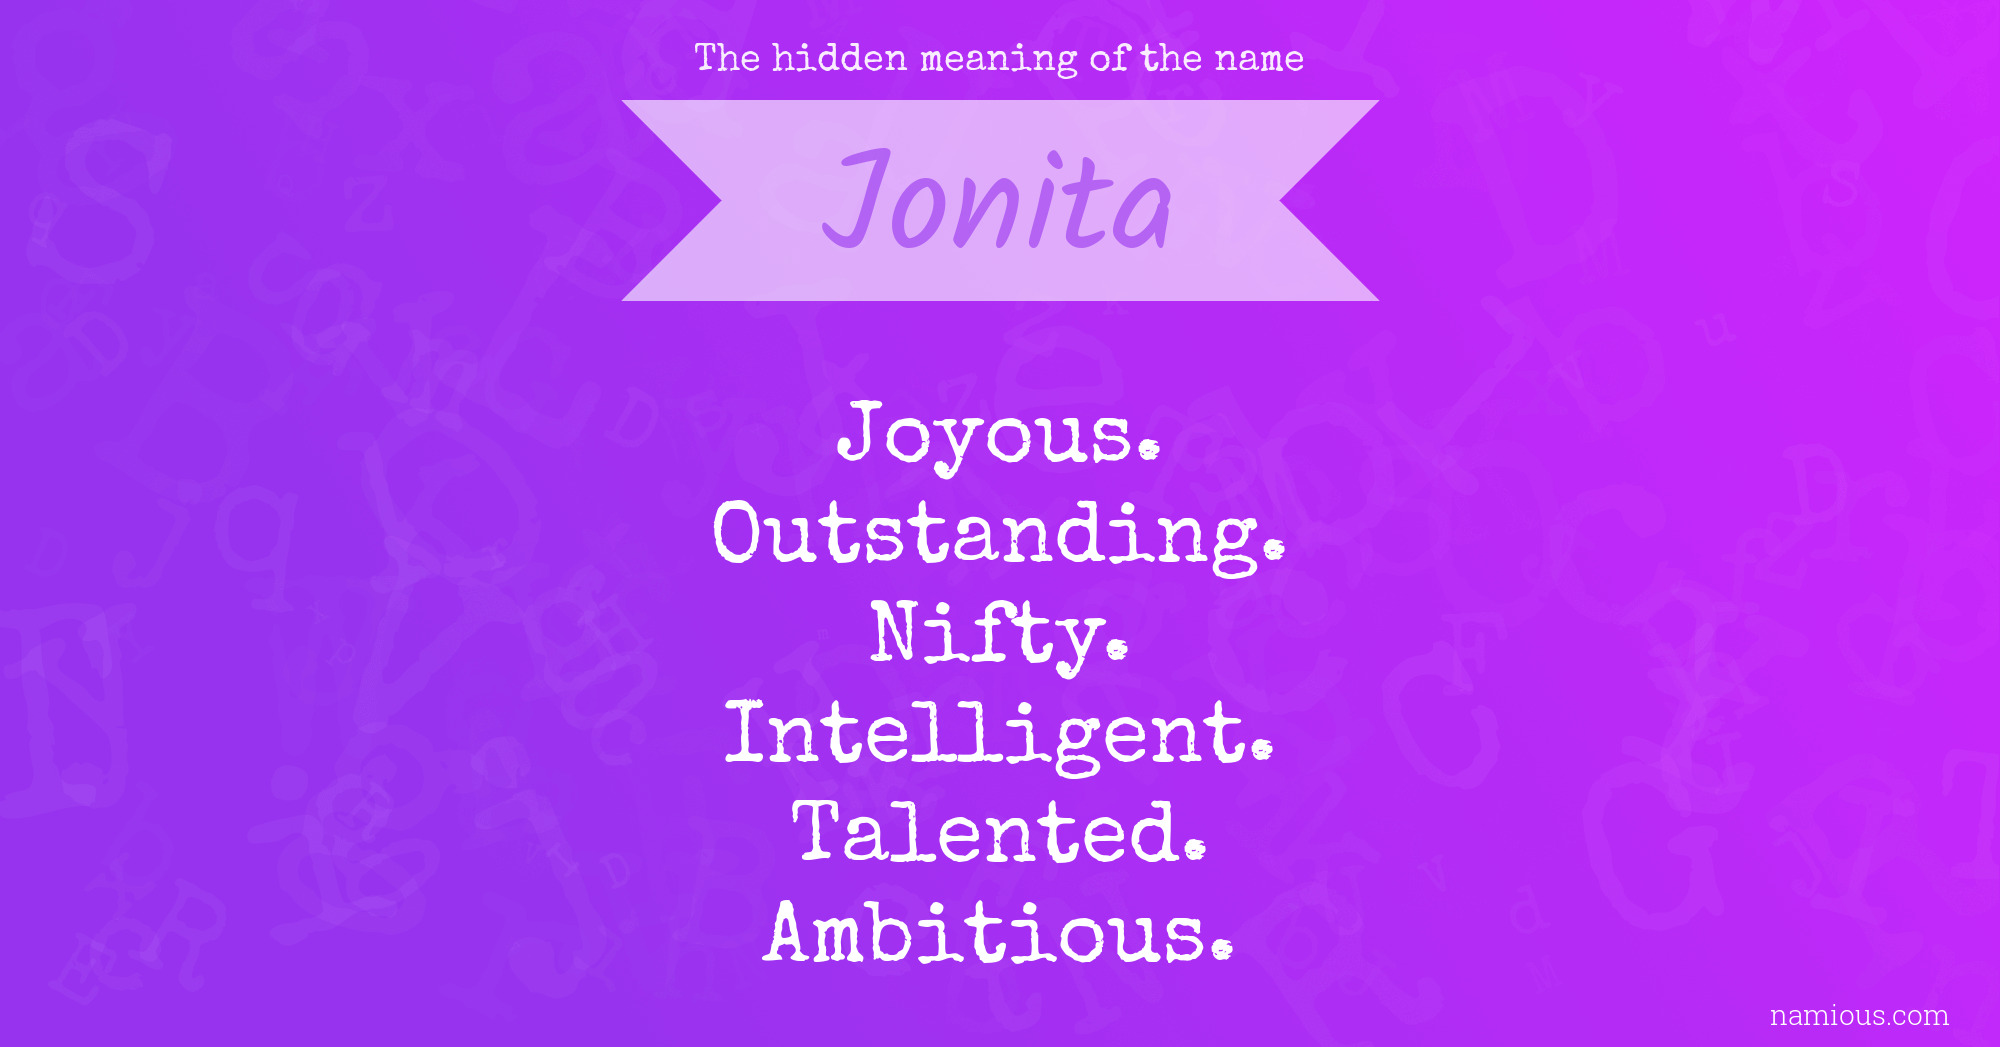 The hidden meaning of the name Jonita